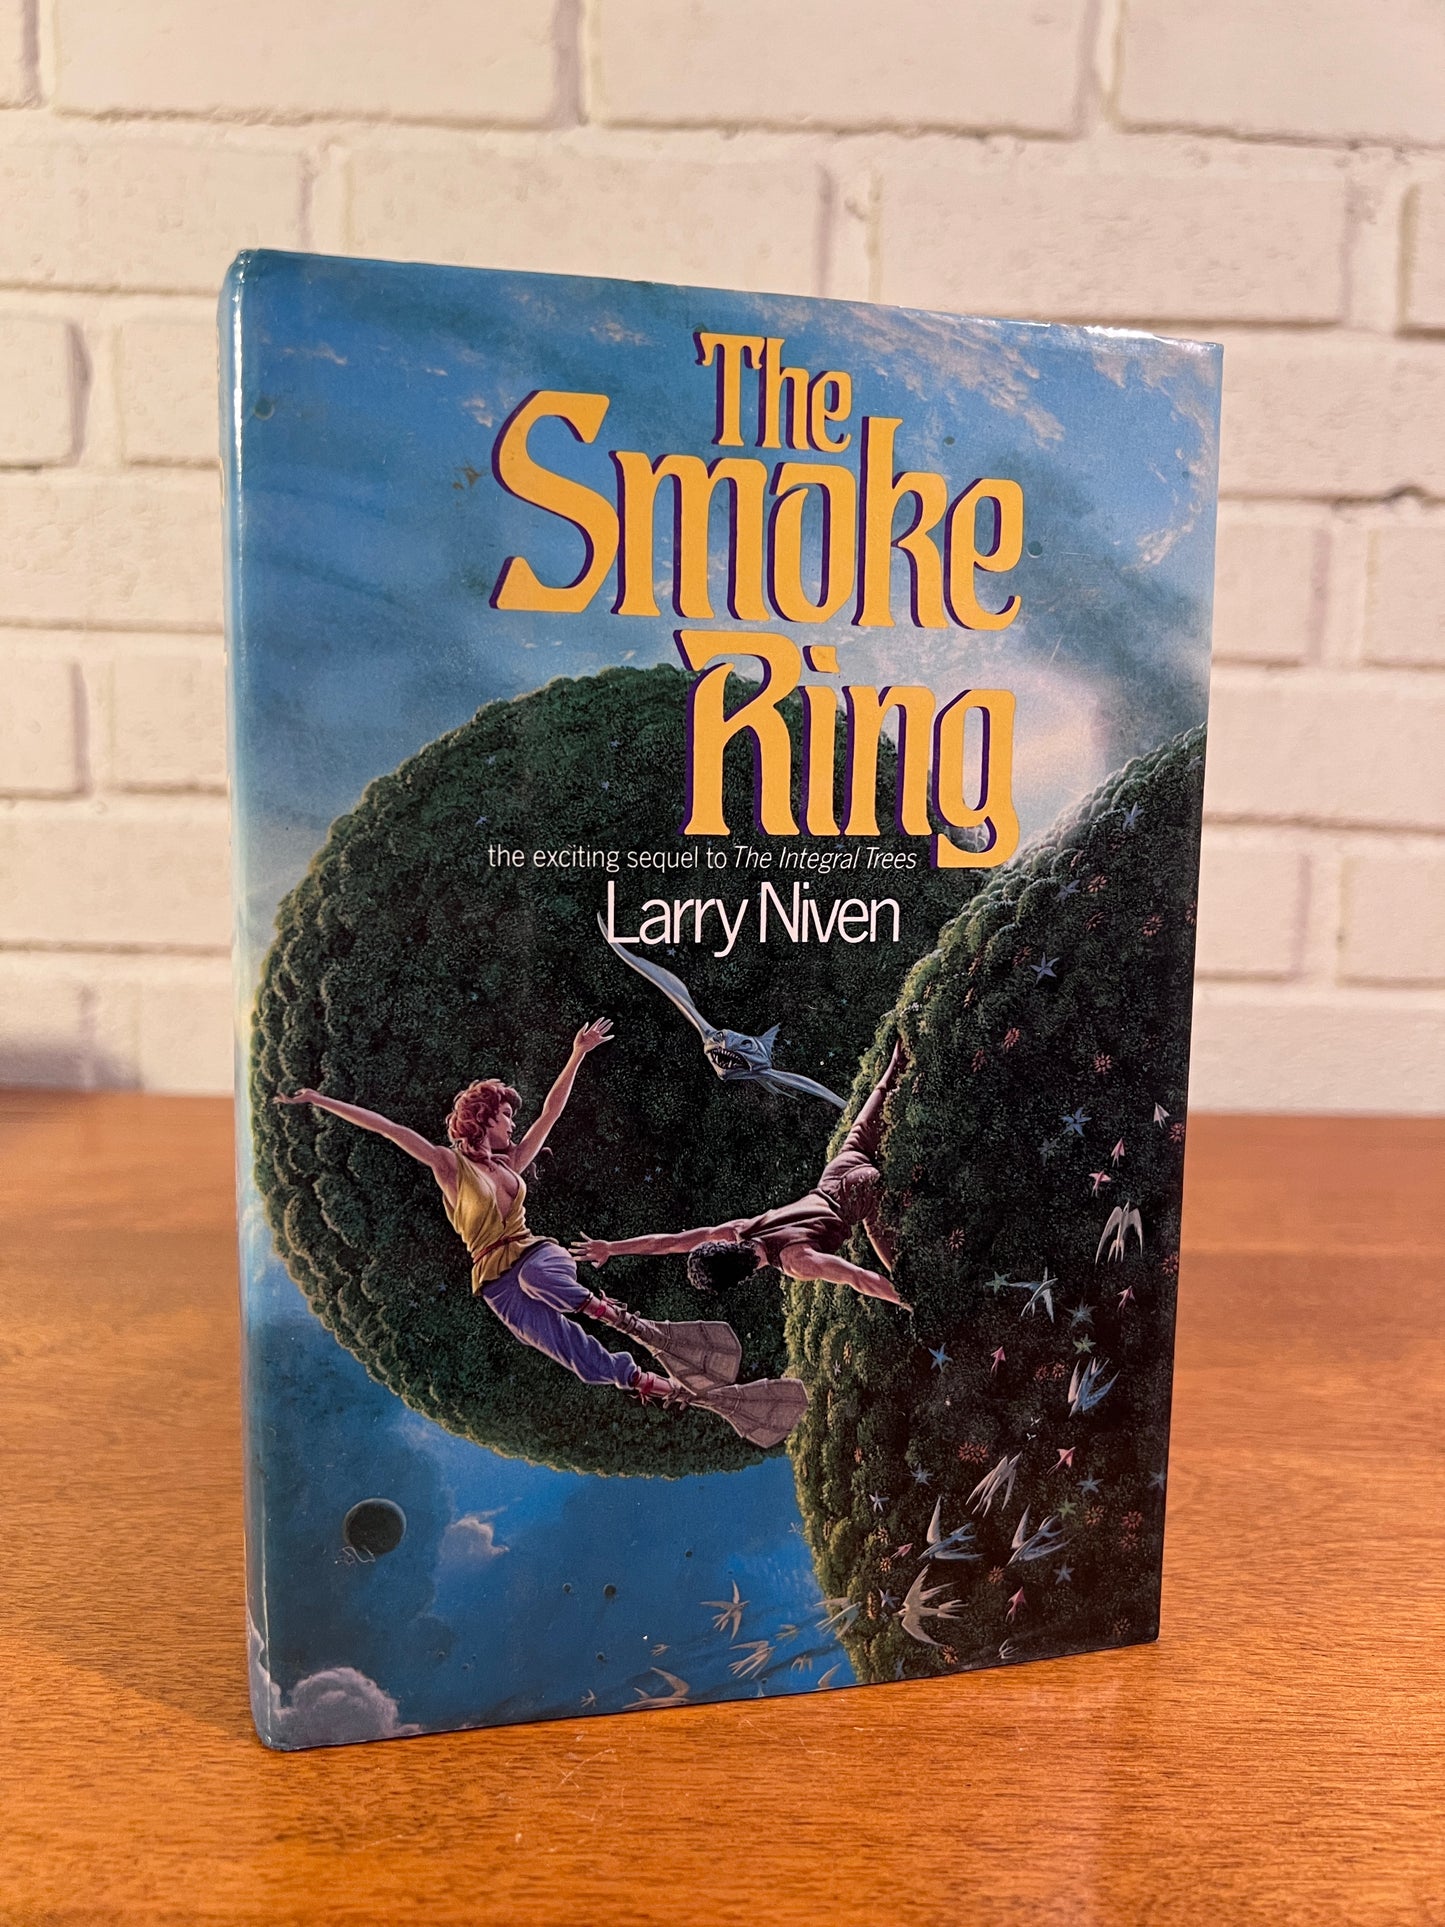 The Smoke Ring by Larry Niven